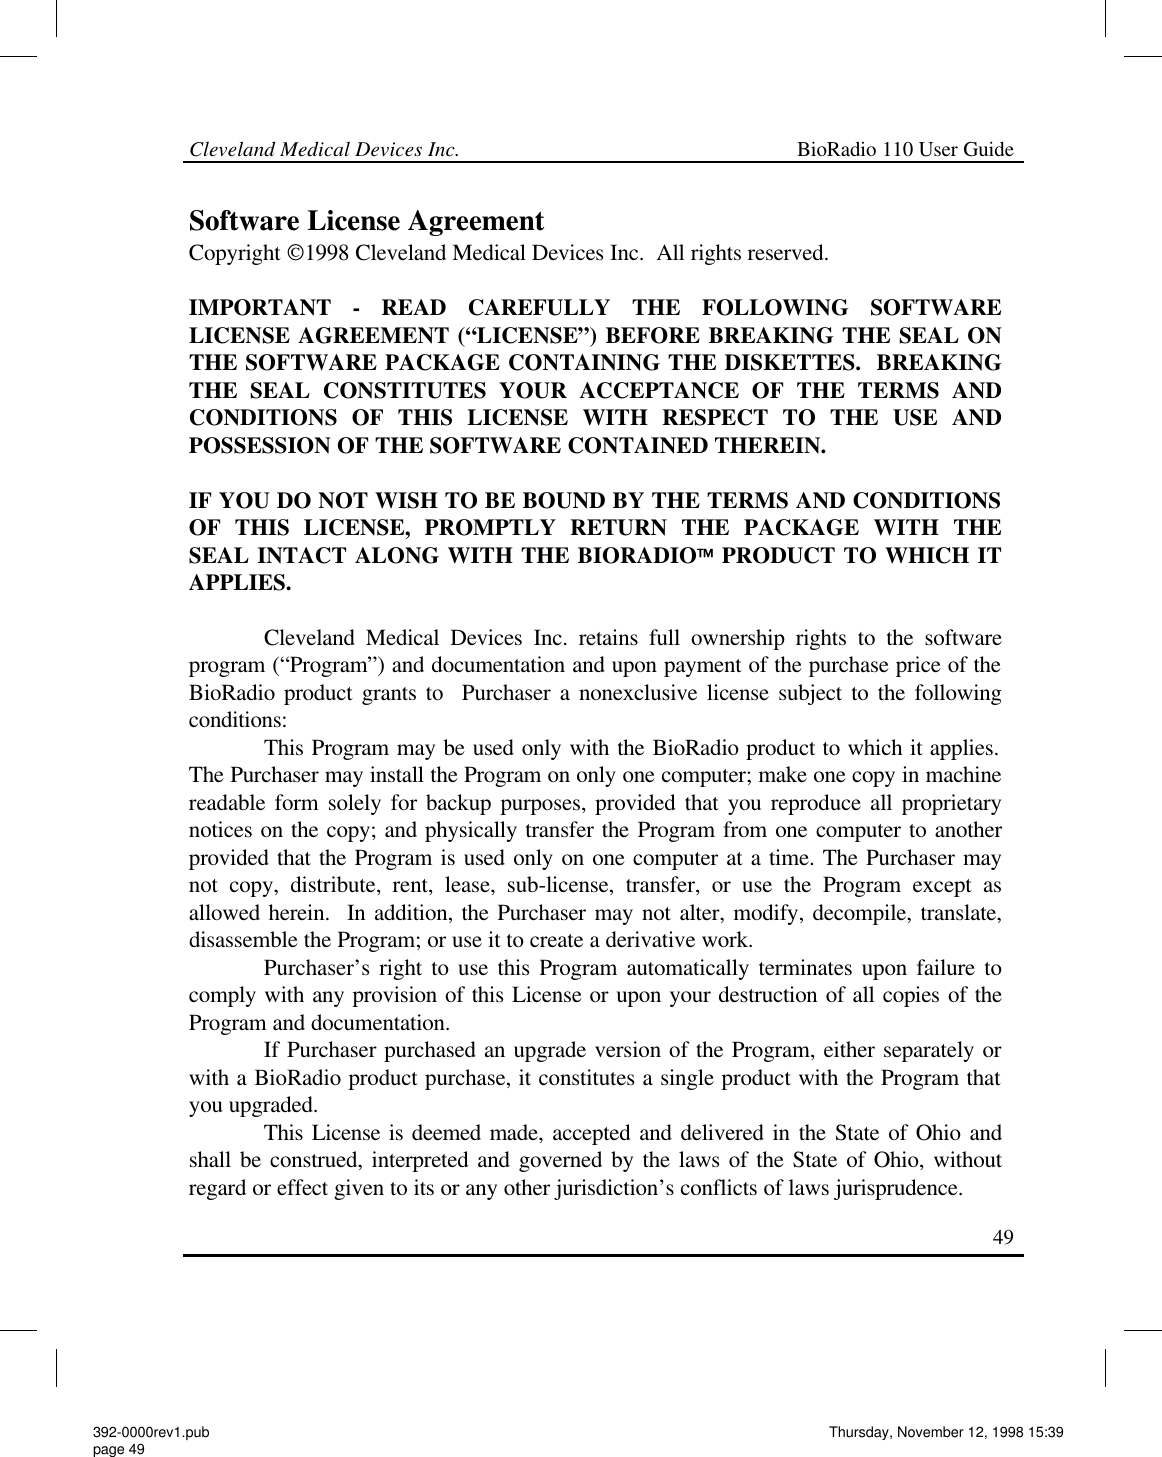 Cleveland Medical Devices Inc.                                                             BioRadio 110 User Guide                                                                                                                                                   49 Software License Agreement Copyright 1998 Cleveland Medical Devices Inc.  All rights reserved.  IMPORTANT - READ CAREFULLY THE FOLLOWING SOFTWARE LICENSE AGREEMENT (“LICENSE”) BEFORE BREAKING THE SEAL ON THE SOFTWARE PACKAGE CONTAINING THE DISKETTES.  BREAKING THE SEAL CONSTITUTES YOUR ACCEPTANCE OF THE TERMS AND CONDITIONS OF THIS LICENSE WITH RESPECT TO THE USE AND POSSESSION OF THE SOFTWARE CONTAINED THEREIN.  IF YOU DO NOT WISH TO BE BOUND BY THE TERMS AND CONDITIONS OF THIS LICENSE, PROMPTLY RETURN THE PACKAGE WITH THE SEAL INTACT ALONG WITH THE BIORADIO PRODUCT TO WHICH IT APPLIES.  Cleveland Medical Devices Inc. retains full ownership rights to the software program (“Program”) and documentation and upon payment of the purchase price of the BioRadio product grants to  Purchaser a nonexclusive license subject to the following conditions: This Program may be used only with the BioRadio product to which it applies.  The Purchaser may install the Program on only one computer; make one copy in machine readable form solely for backup purposes, provided that you reproduce all proprietary notices on the copy; and physically transfer the Program from one computer to another provided that the Program is used only on one computer at a time. The Purchaser may not copy, distribute, rent, lease, sub-license, transfer, or use the Program except as allowed herein.  In addition, the Purchaser may not alter, modify, decompile, translate, disassemble the Program; or use it to create a derivative work. Purchaser’s right to use this Program automatically terminates upon failure to comply with any provision of this License or upon your destruction of all copies of the Program and documentation.              If Purchaser purchased an upgrade version of the Program, either separately or with a BioRadio product purchase, it constitutes a single product with the Program that you upgraded. This License is deemed made, accepted and delivered in the State of Ohio and shall be construed, interpreted and governed by the laws of the State of Ohio, without regard or effect given to its or any other jurisdiction’s conflicts of laws jurisprudence. 392-0000rev1.pub page 49 Thursday, November 12, 1998 15:39 